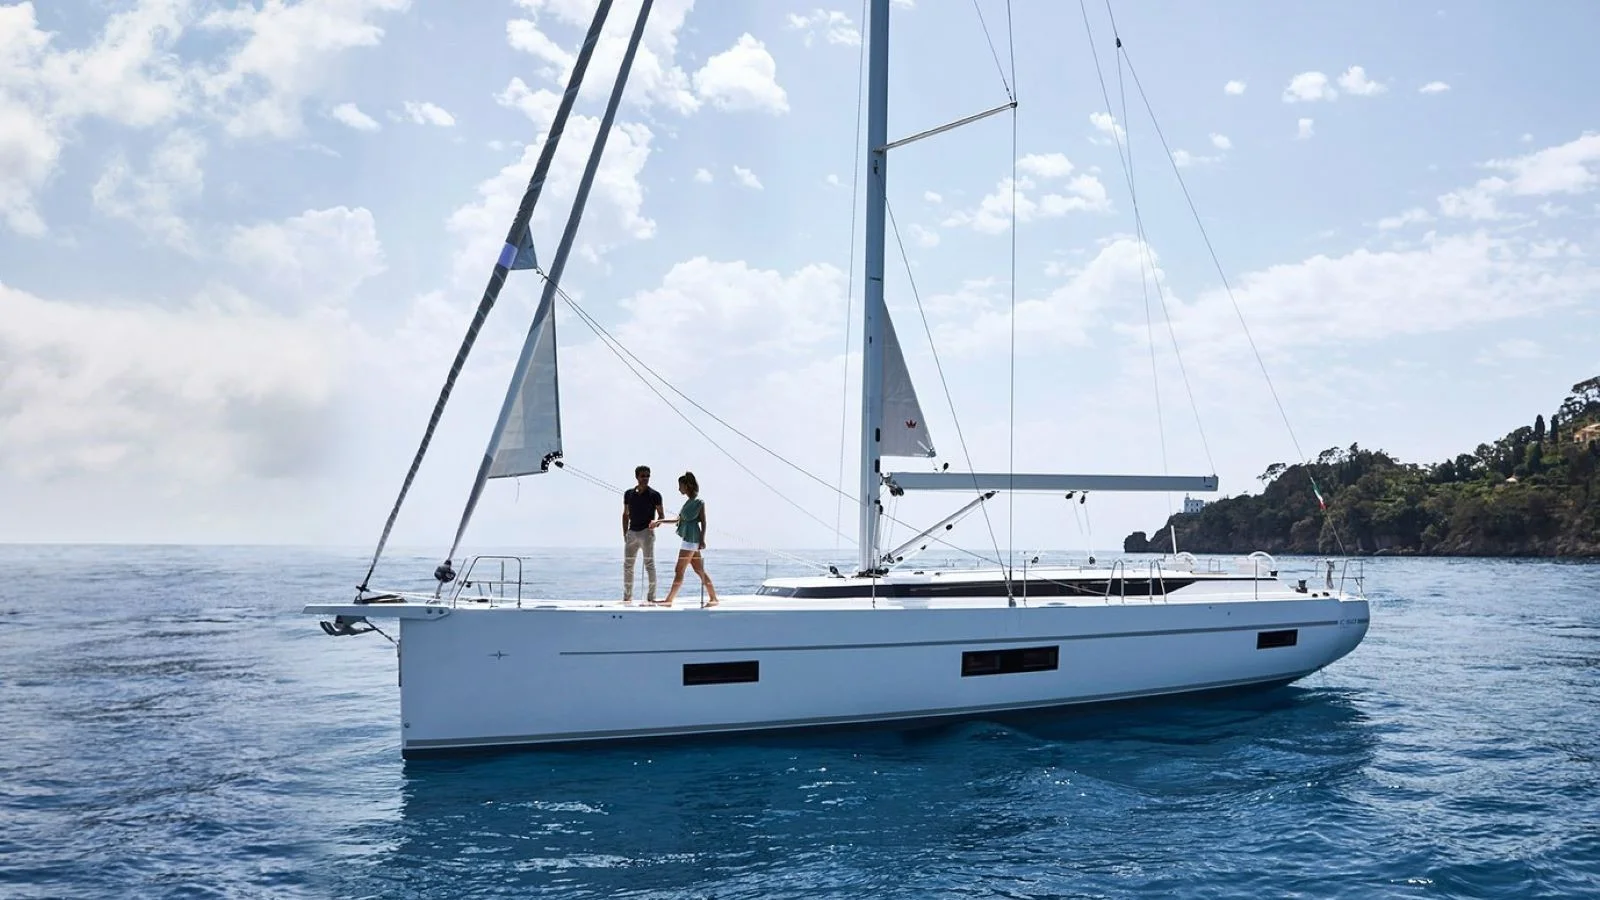 Most of the charter fleet under 20 m are sailing yachts